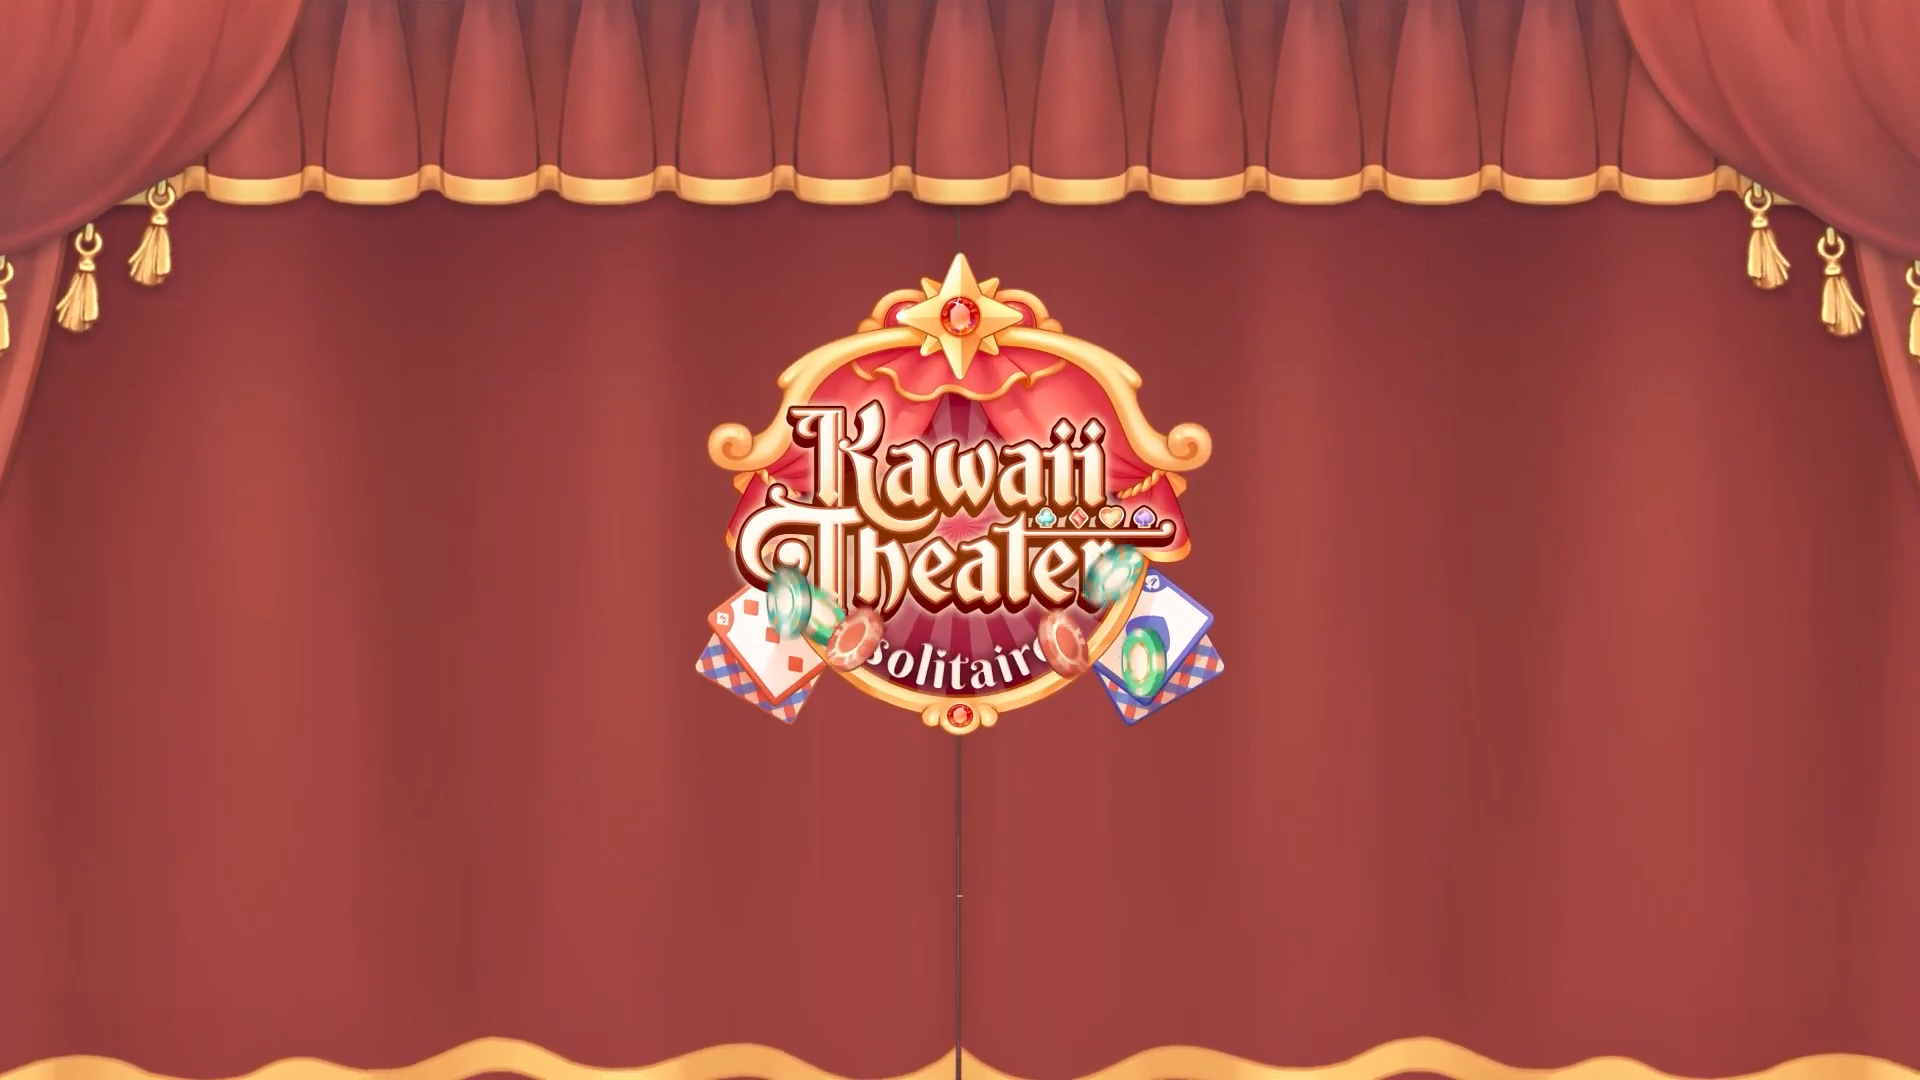 Scarica Kawaii Theater Solitaire gratis per Android.